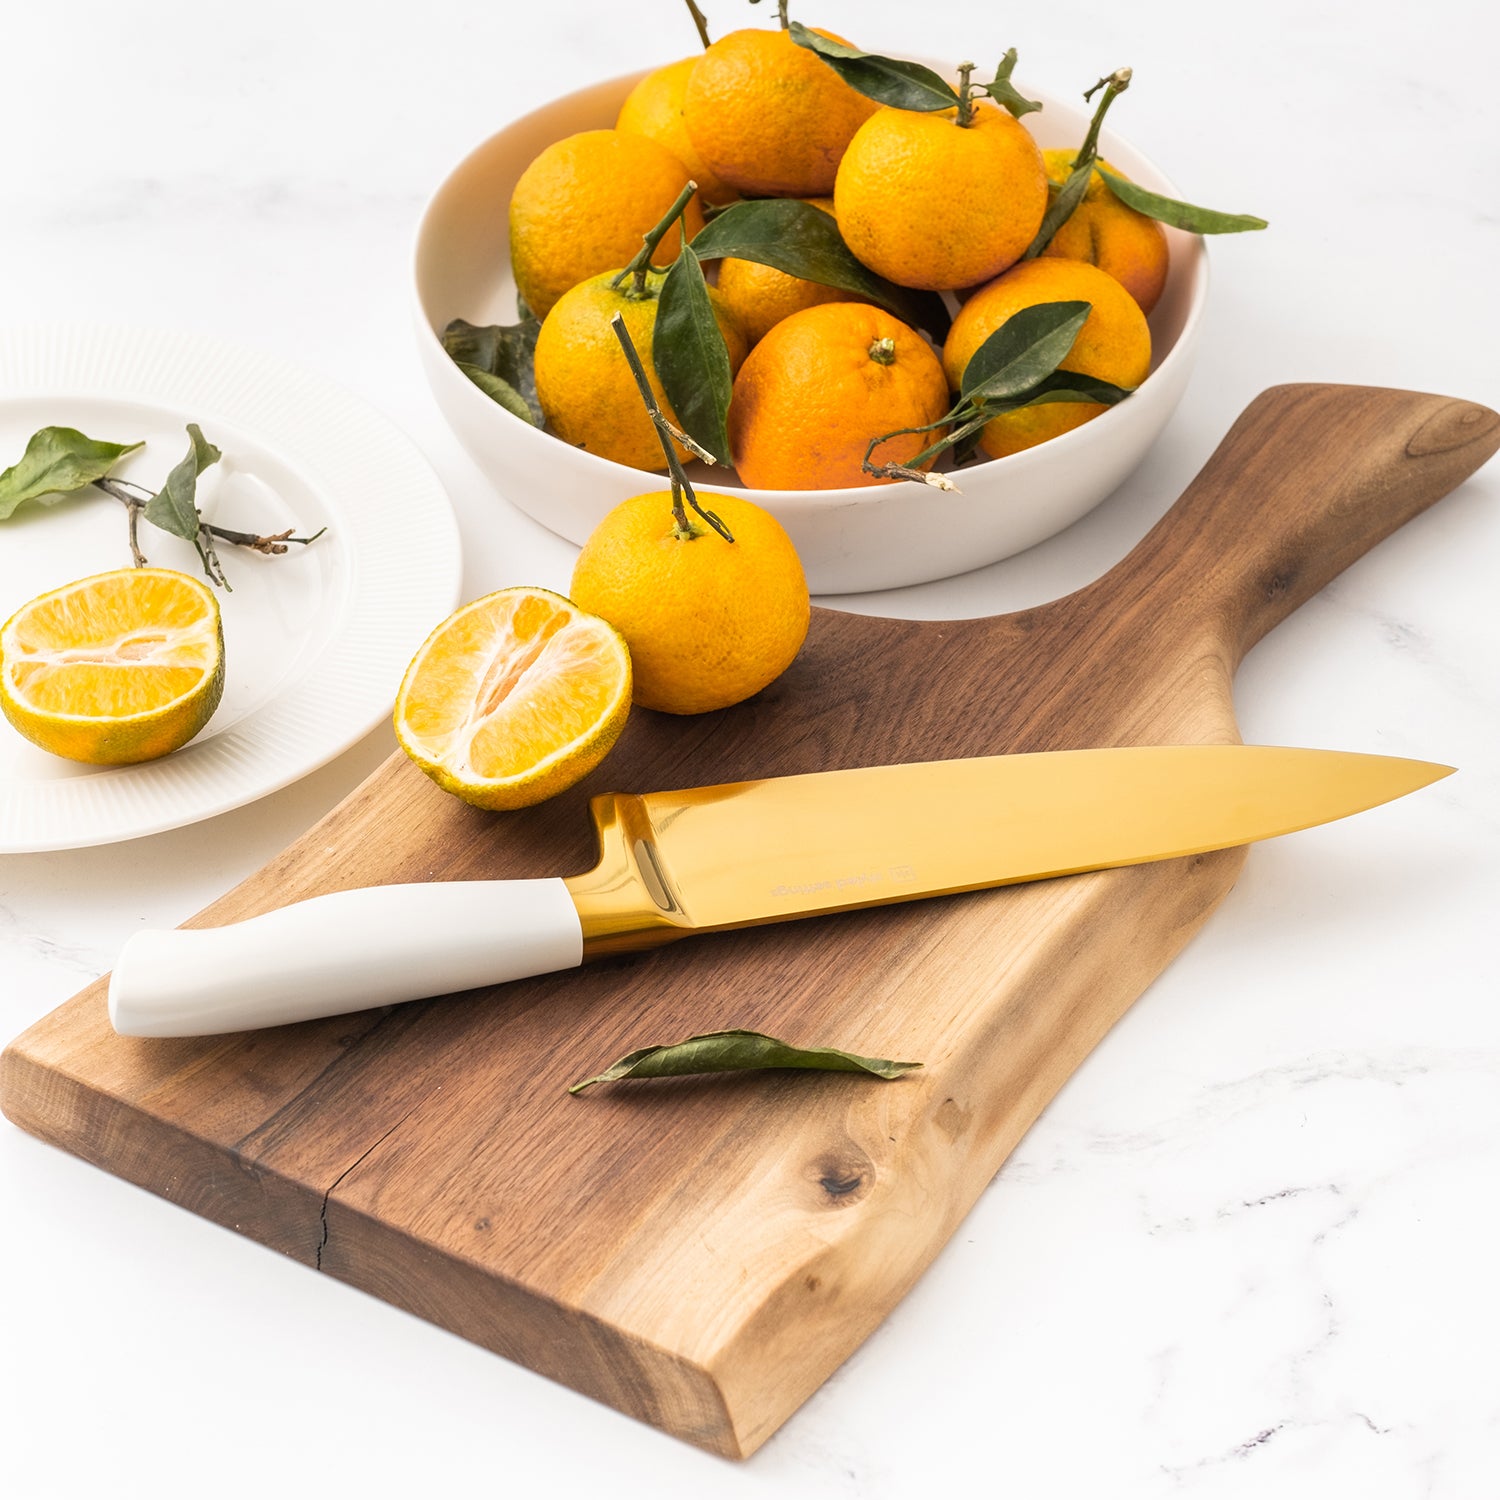 White and Gold Knife Set with White Self-Sharpening Block - Styled Settings